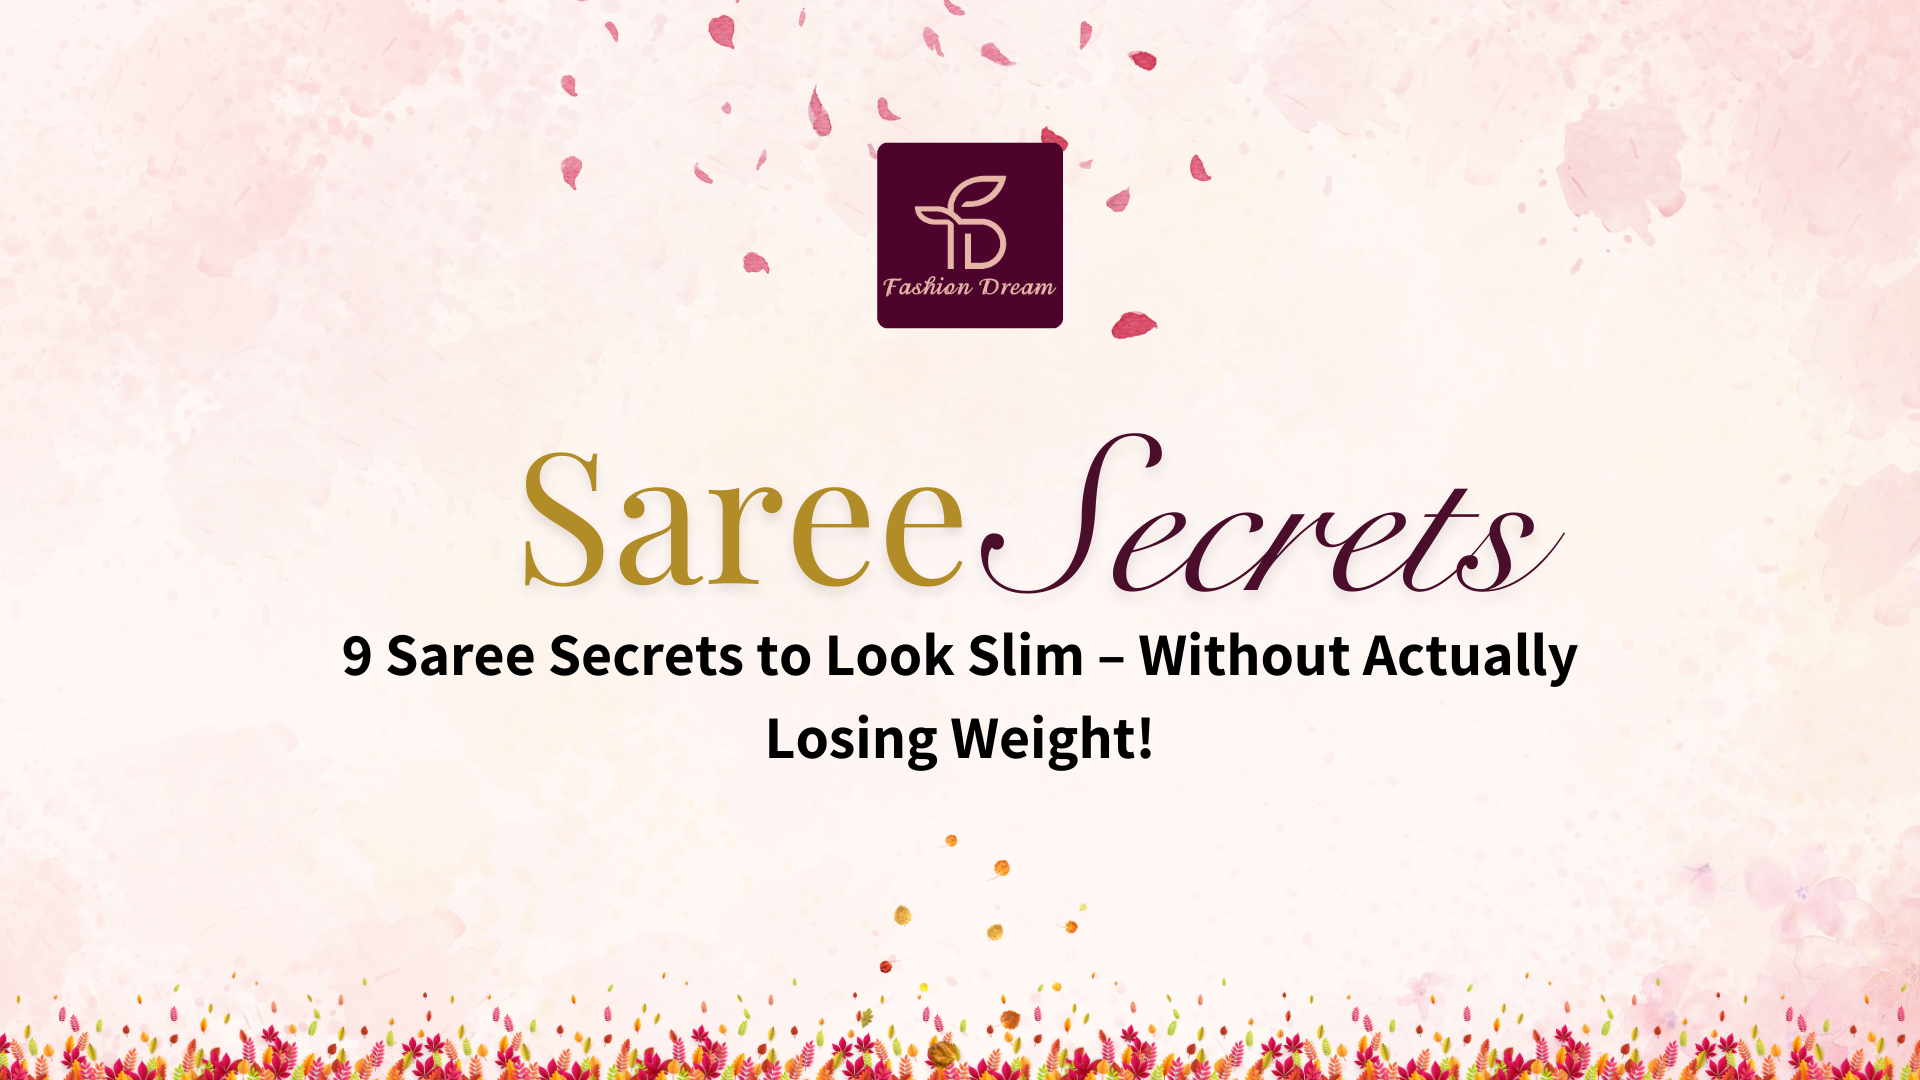 9 Saree Secrets to Look Slim – Without Actually Losing Weight!